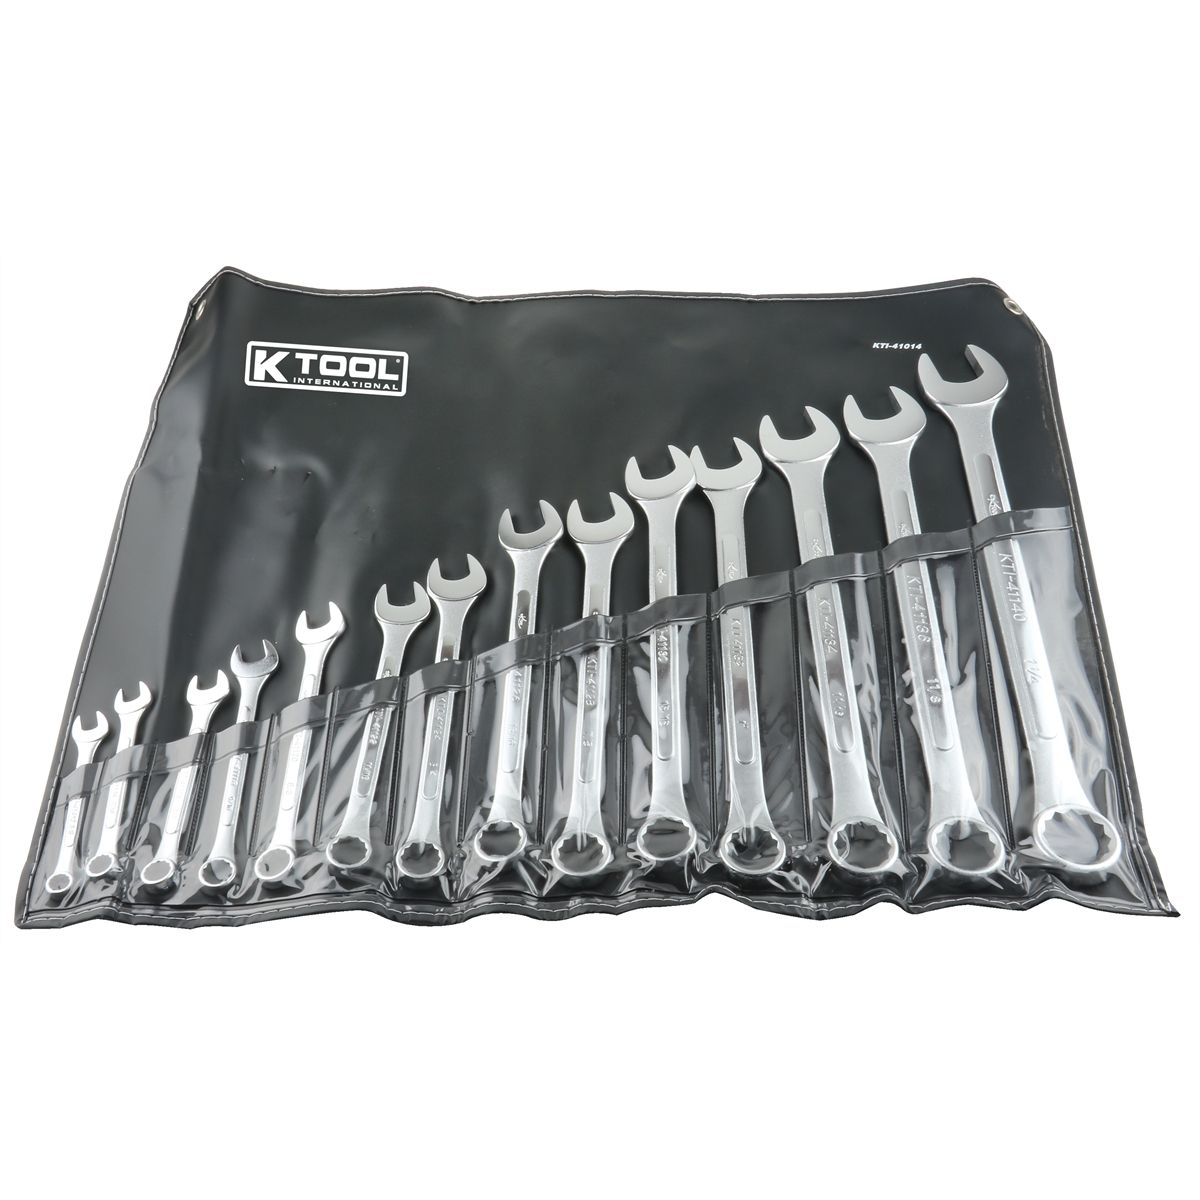 Fractional Combination Wrench Set w/ Kit Bag - 14 Piece